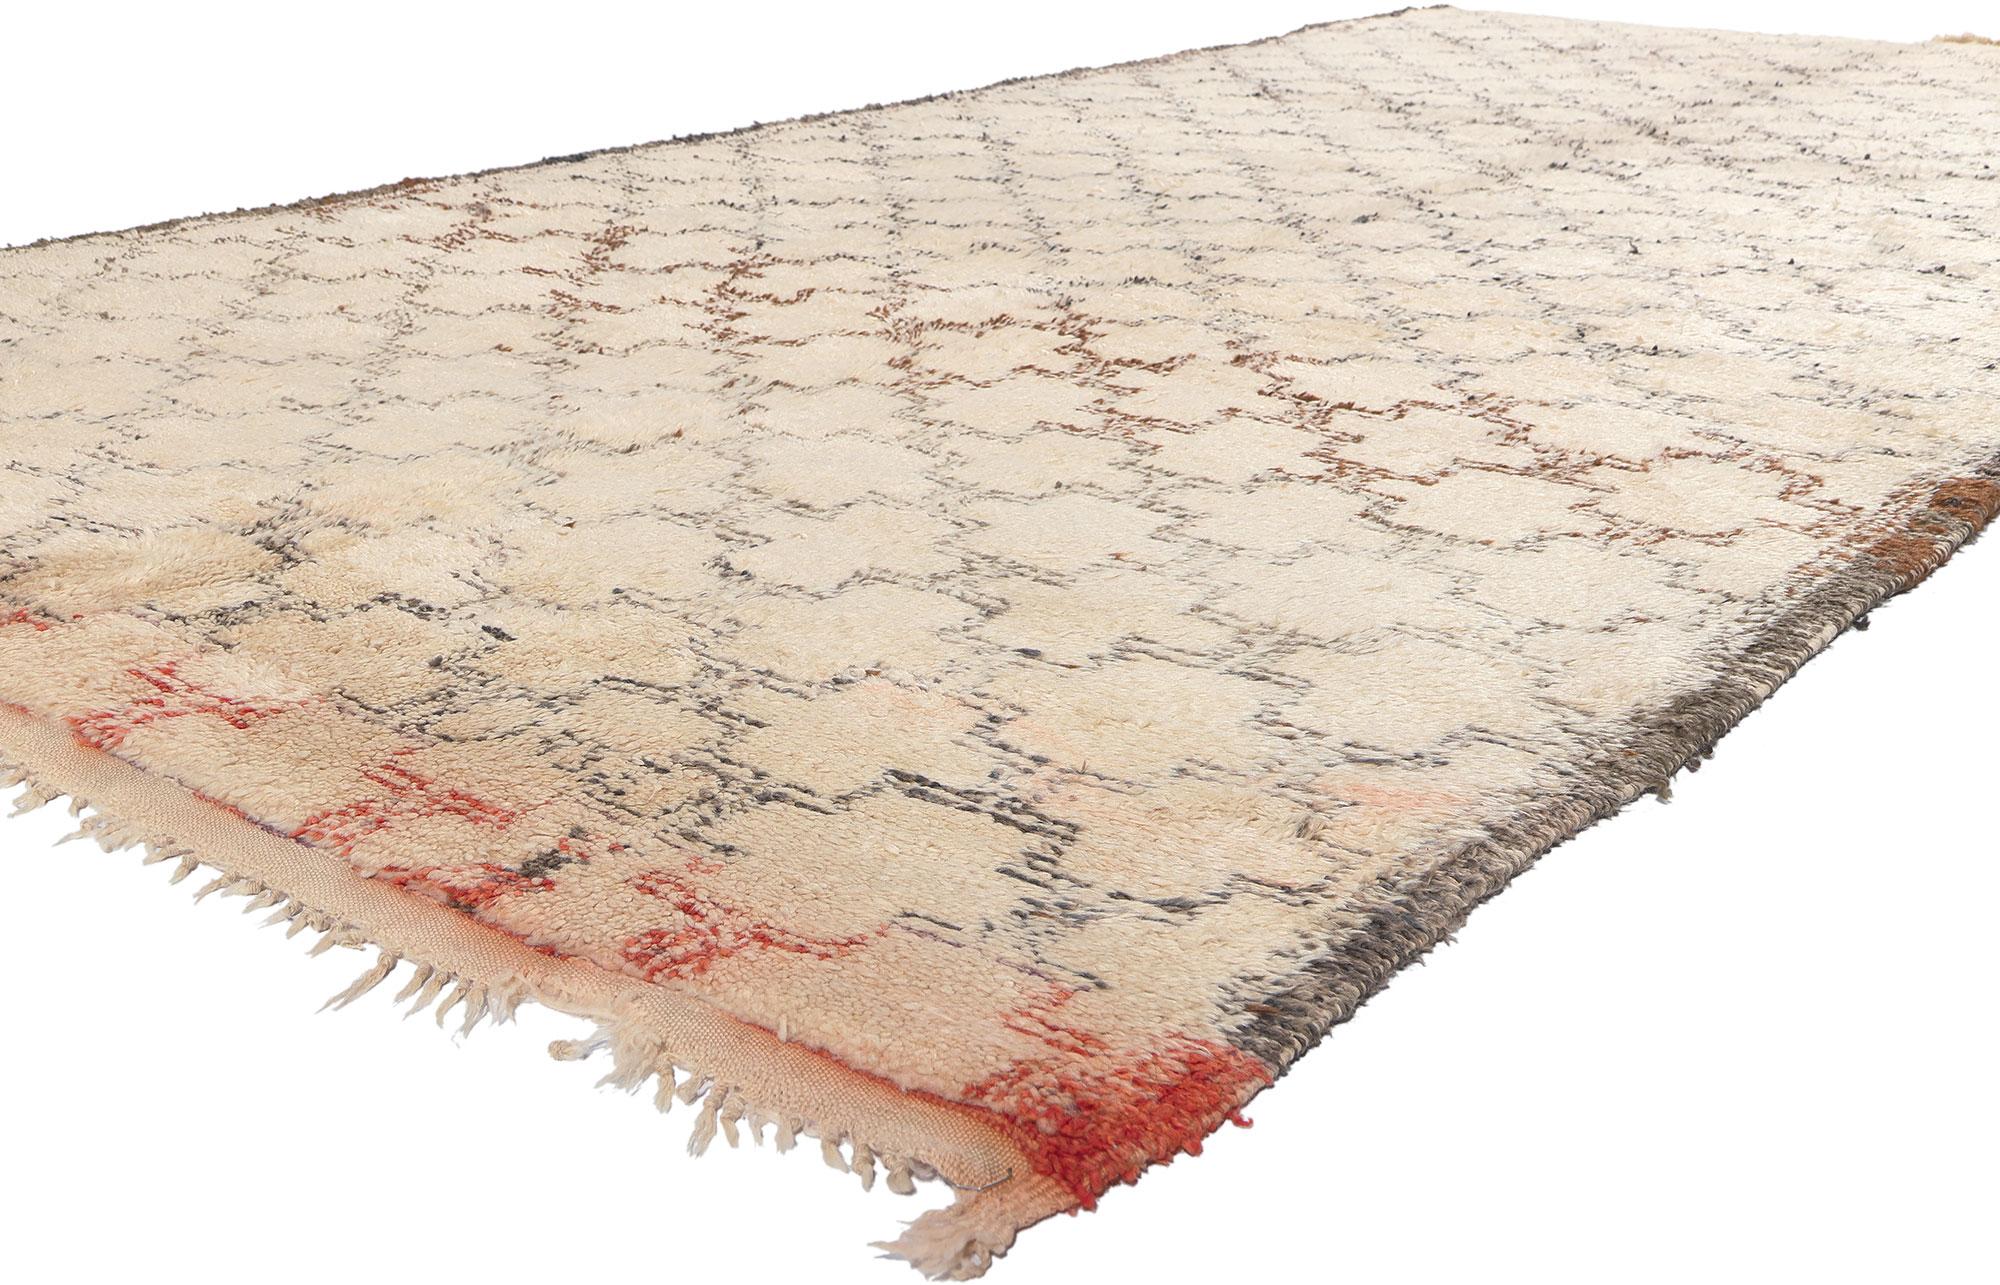 21004 Vintage Moroccan Beni Ourain Rug, 06'04 x 12'11. Originating from the Beni Ourain tribe, an integral part of the broader Berber ethnic group in Morocco, these Moroccan rugs are meticulously crafted using natural, undyed sheep's wool,